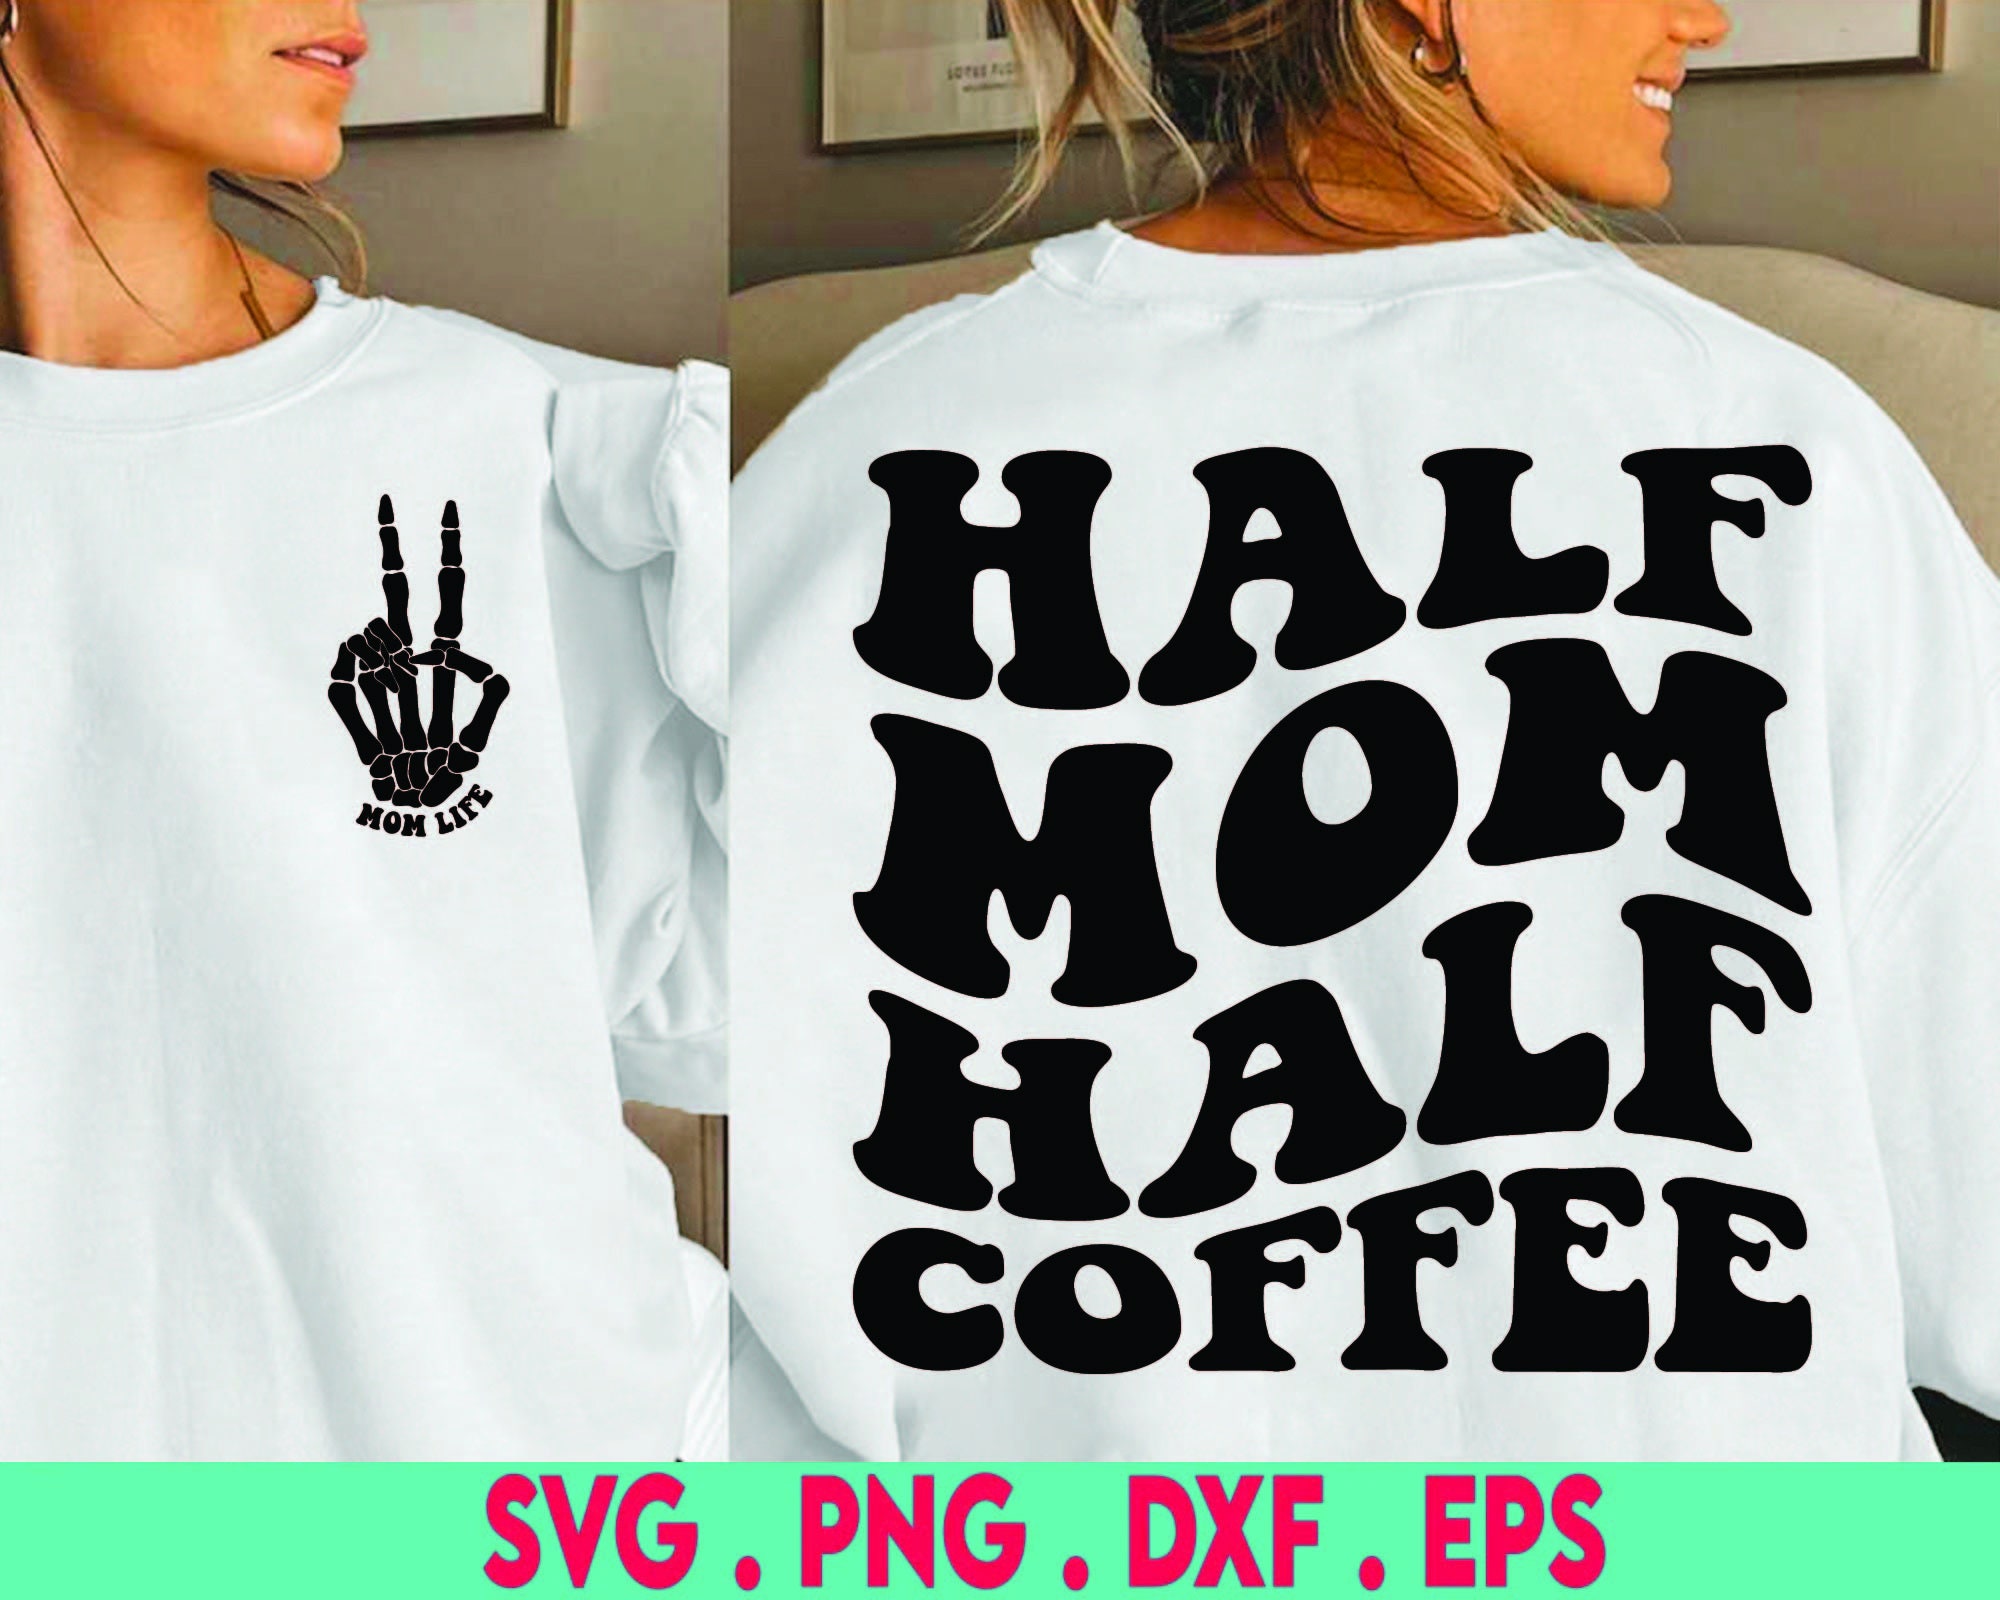 Mama Needs Coffee mothers day quotes mom svg design for t-shirts